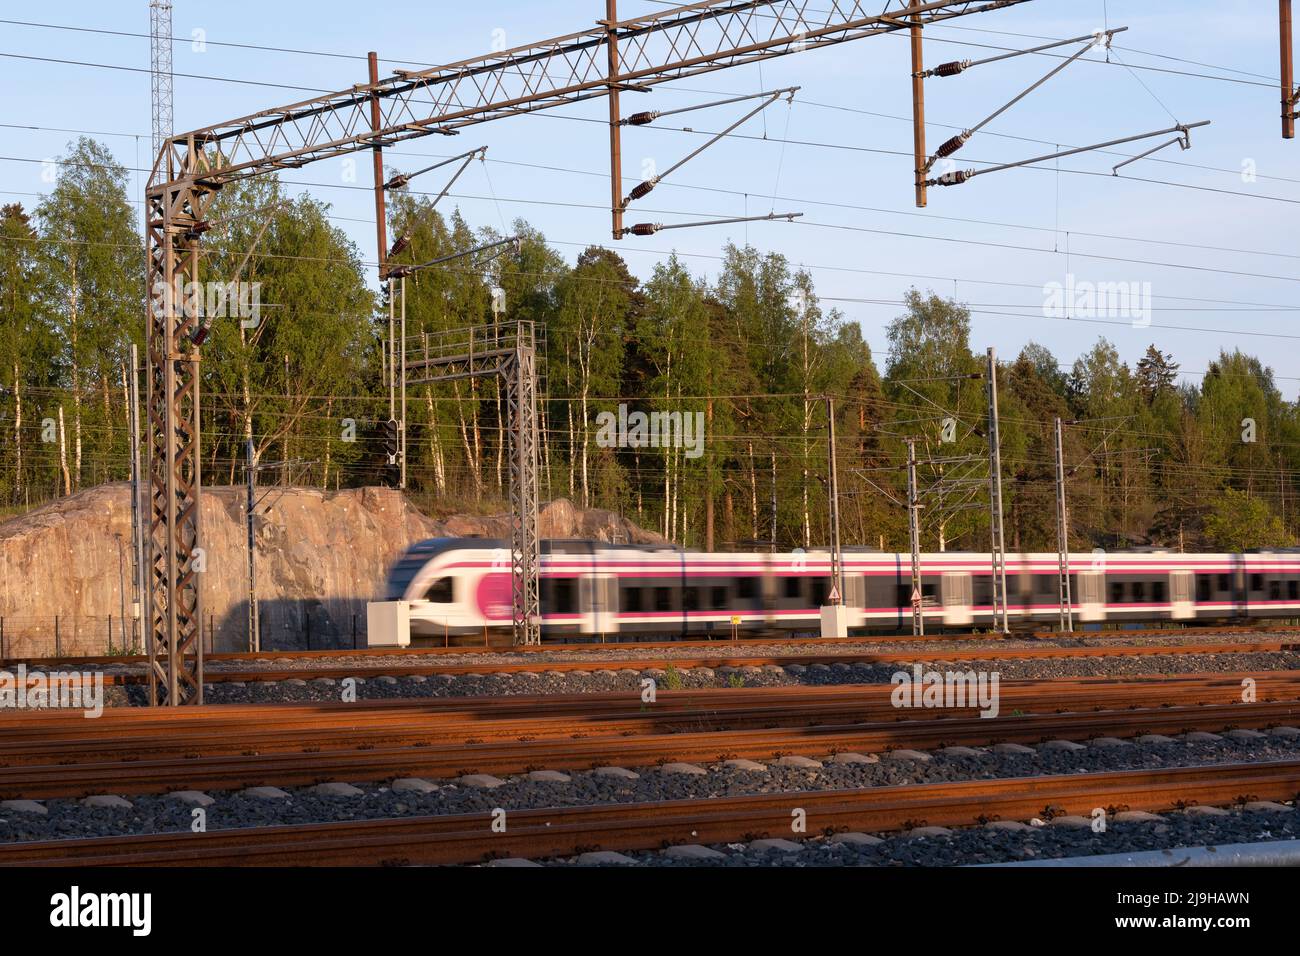 Helsinki / Finland - MAY 22, 2022: Unfocus train passing by a railway junction during the sunset Stock Photo